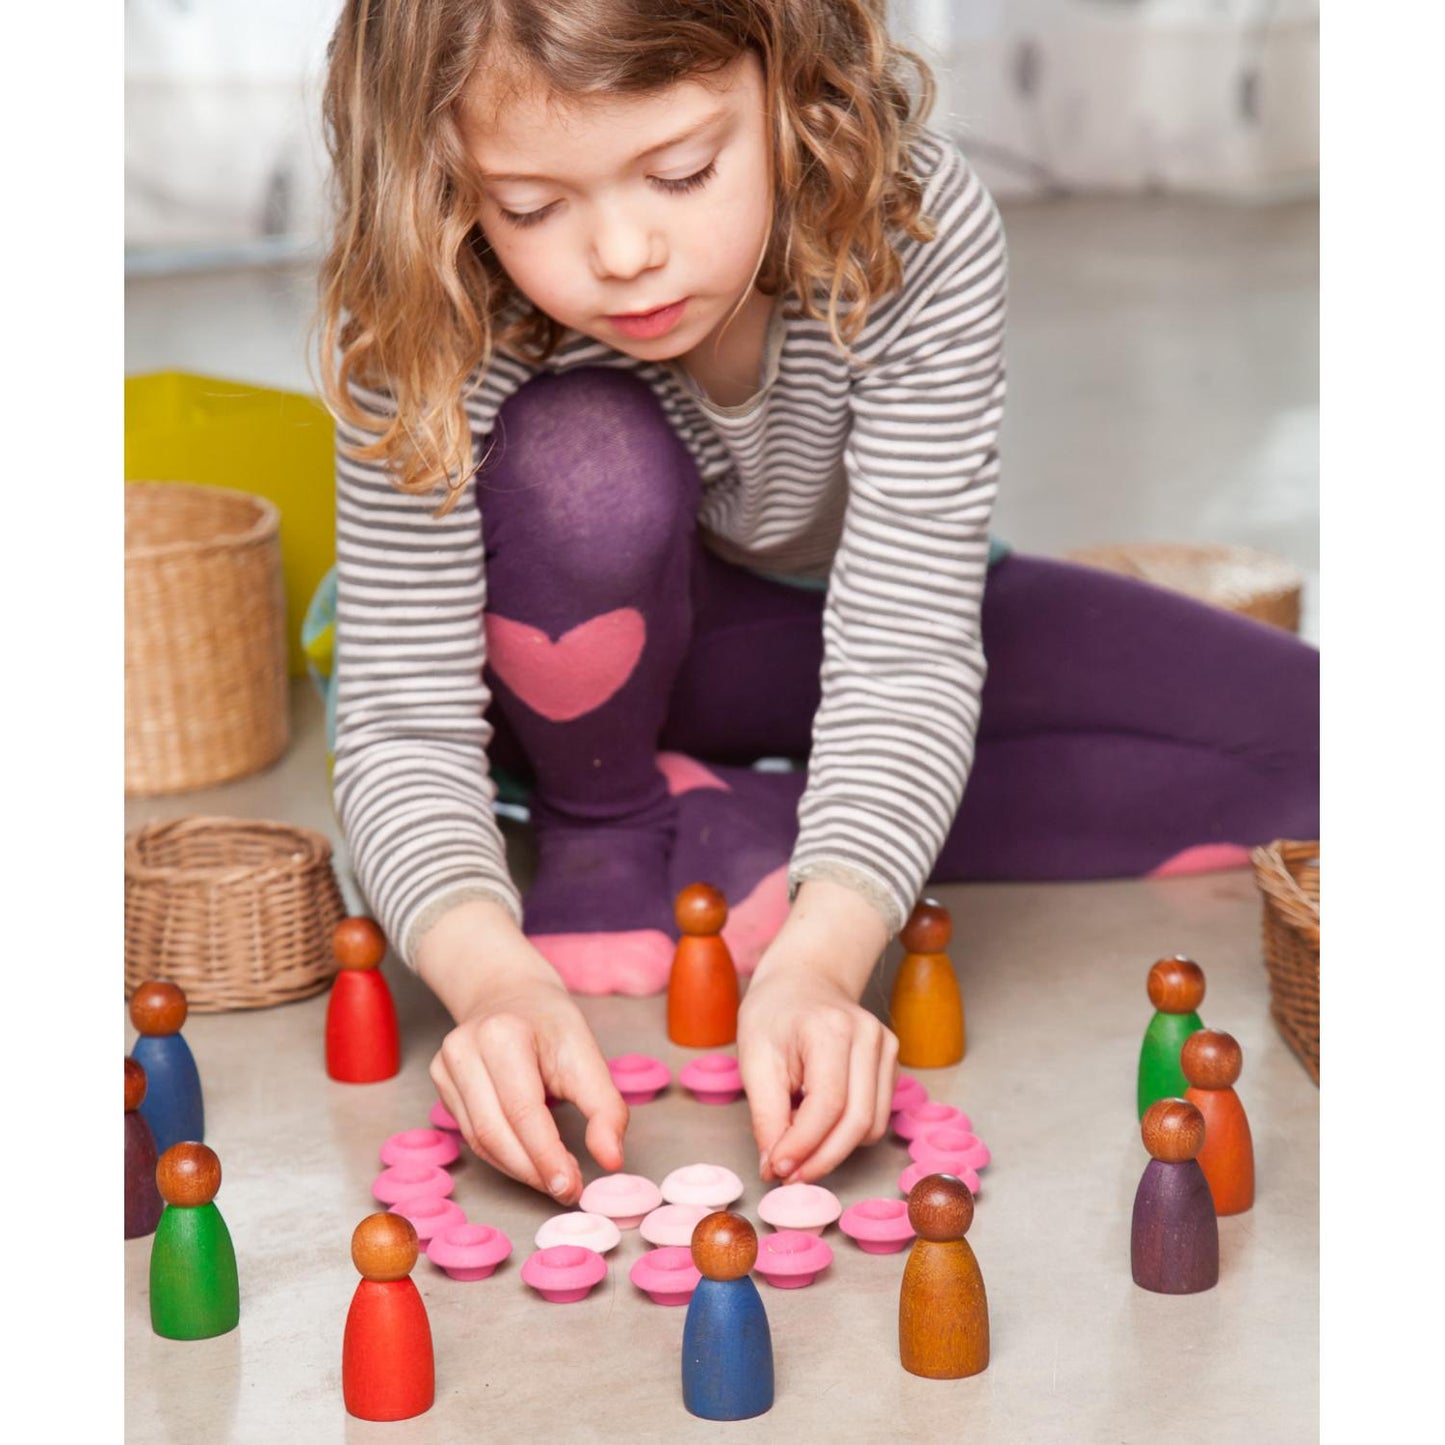 Grapat 3 Dark Wood Nins Stained In Warm Colours | Wooden Toys for Kids | Open-Ended Play Set | Lifestyle: Girl Playing with Dark Wood Nins on Floor | BeoVERDE.ie